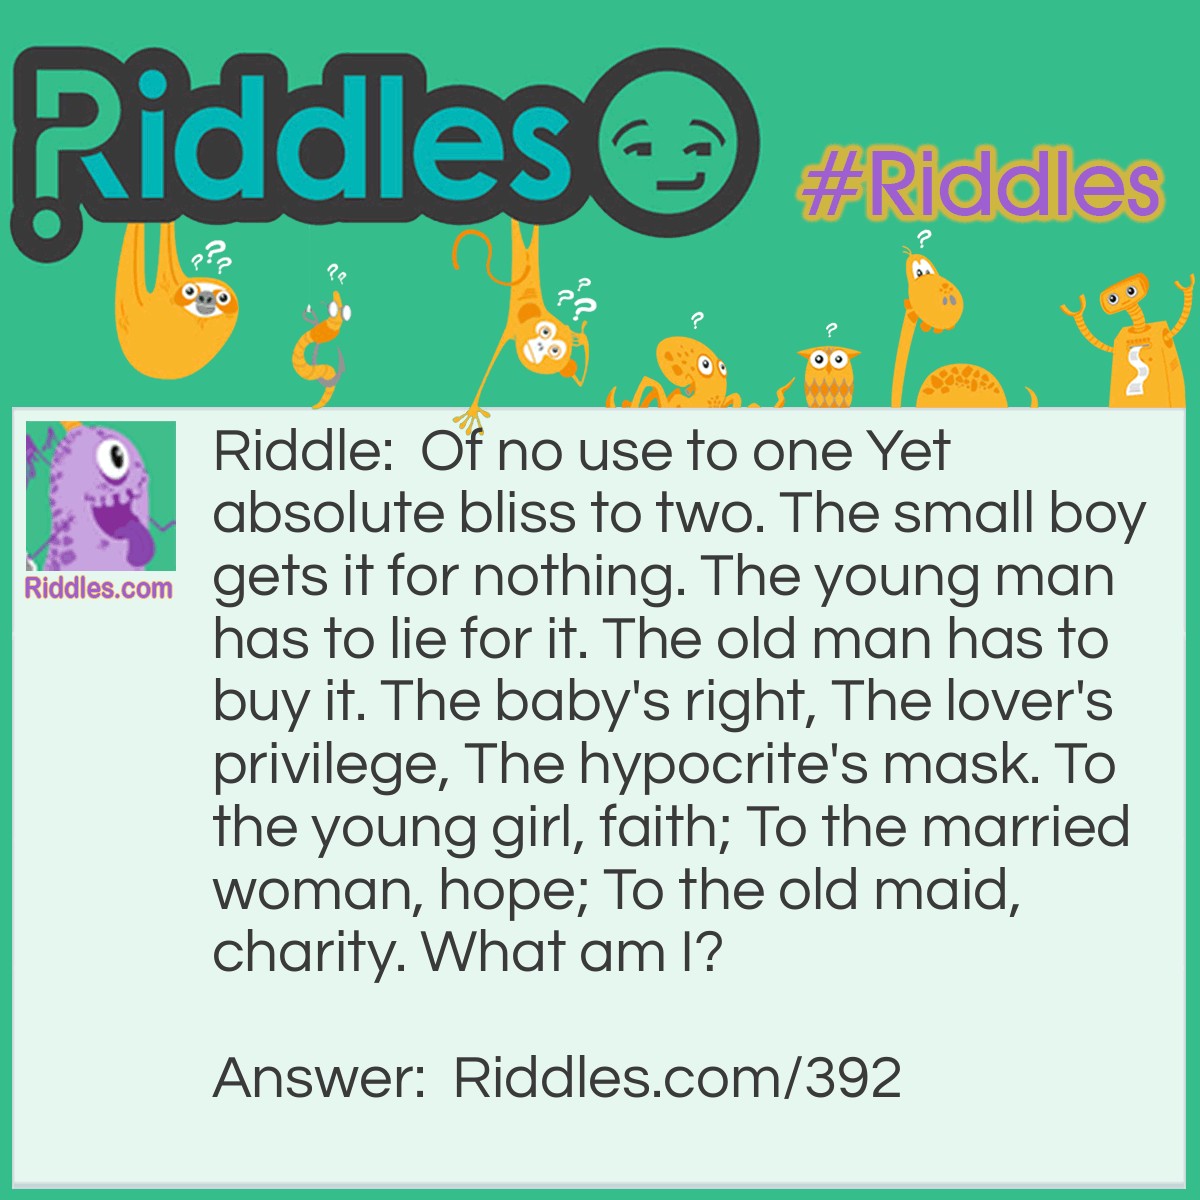 Riddle: Of no use to one Yet absolute bliss to two. The small boy gets it for nothing. The young man has to lie for it. The old man has to buy it. The baby's right, The lover's privilege, The hypocrite's mask. To the young girl, faith; To the married woman, hope; To the old maid, charity. What am I? Answer: A kiss.